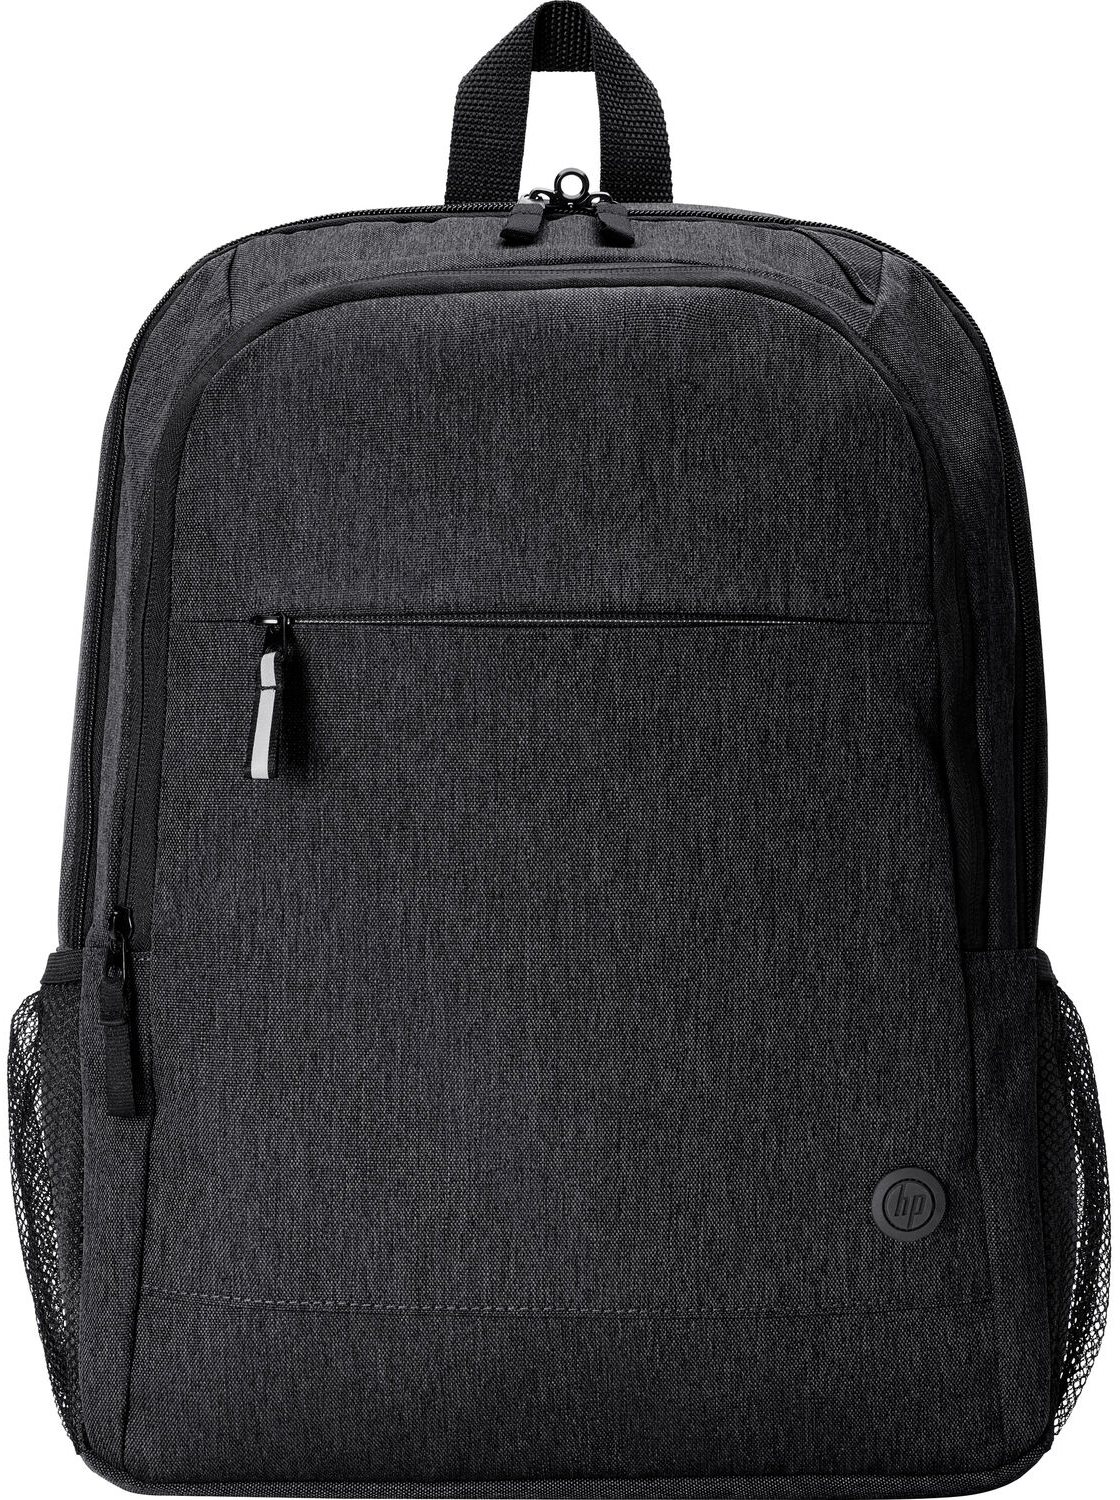 HP Backpack Prelude Pro Recycled 15.6” negro